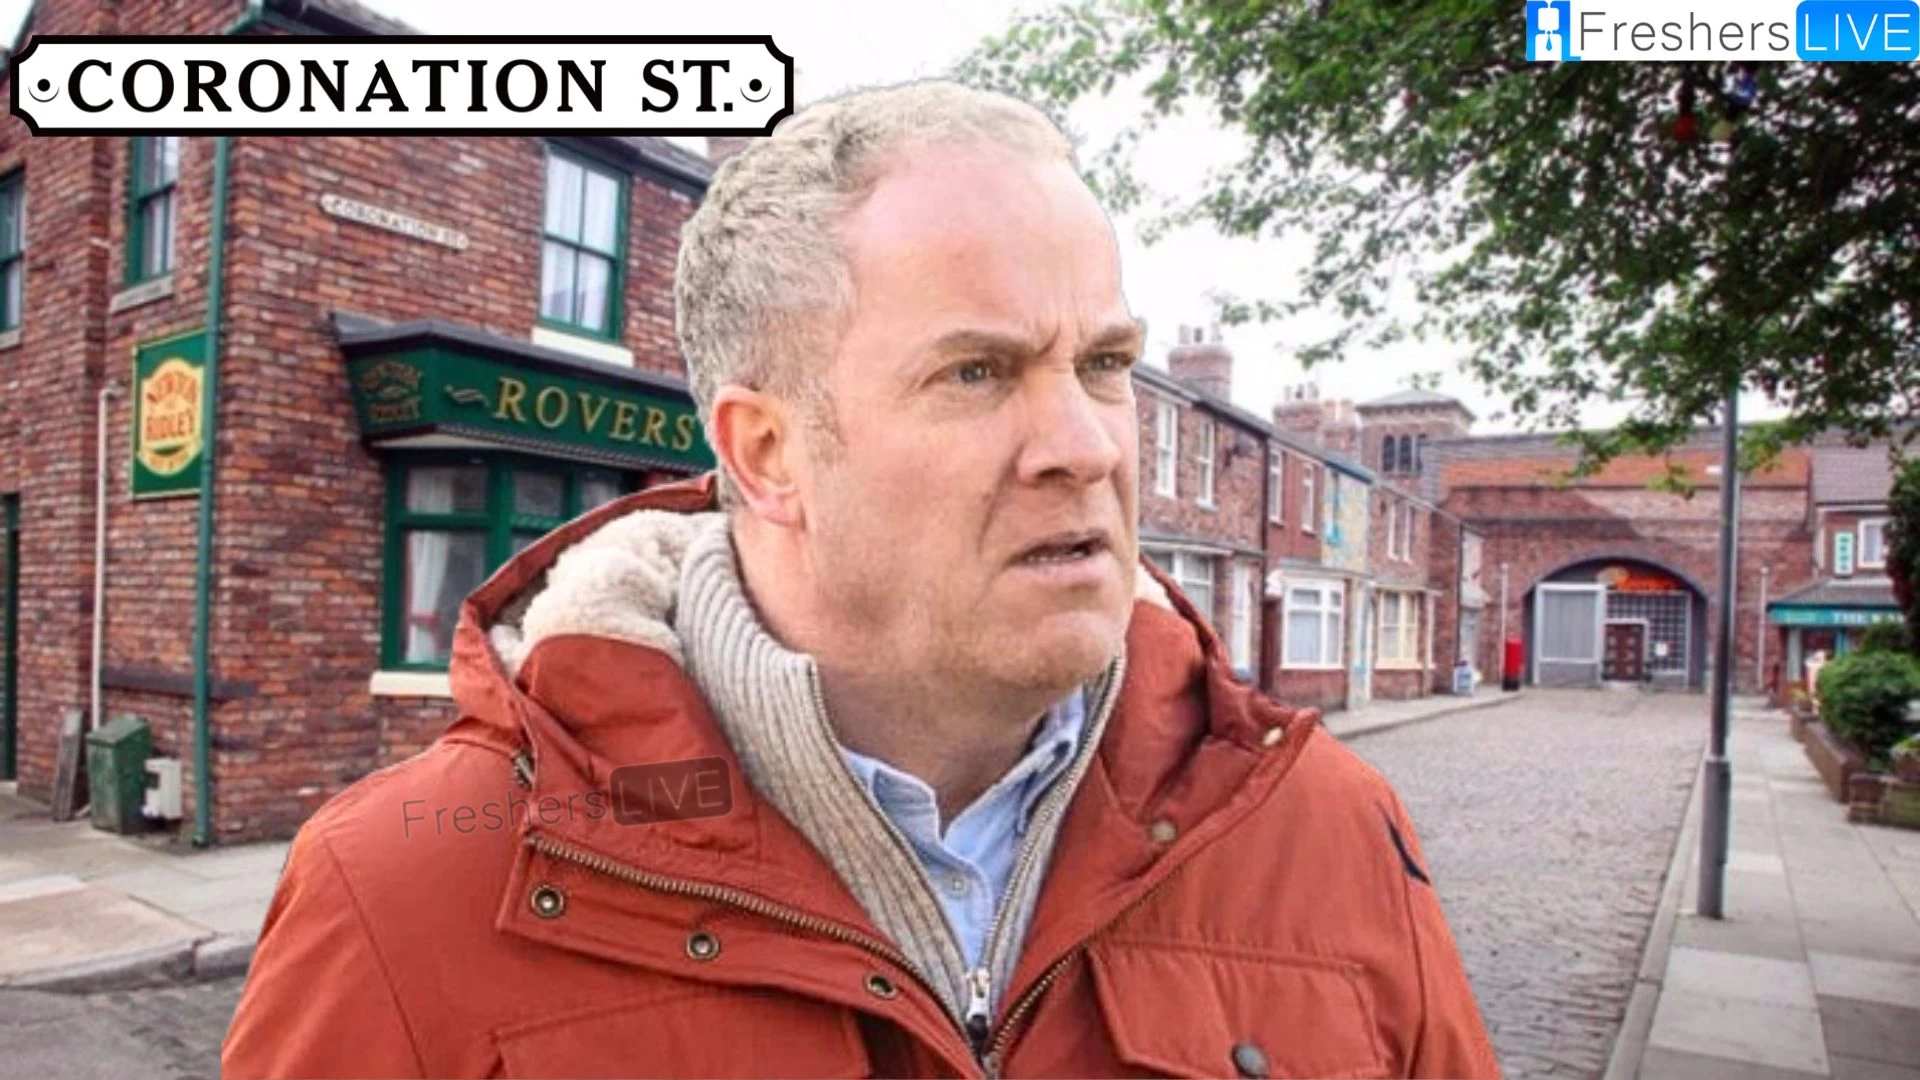 What Happened to Teddy in Coronation Street? Who is Teddy in Coronation Street?